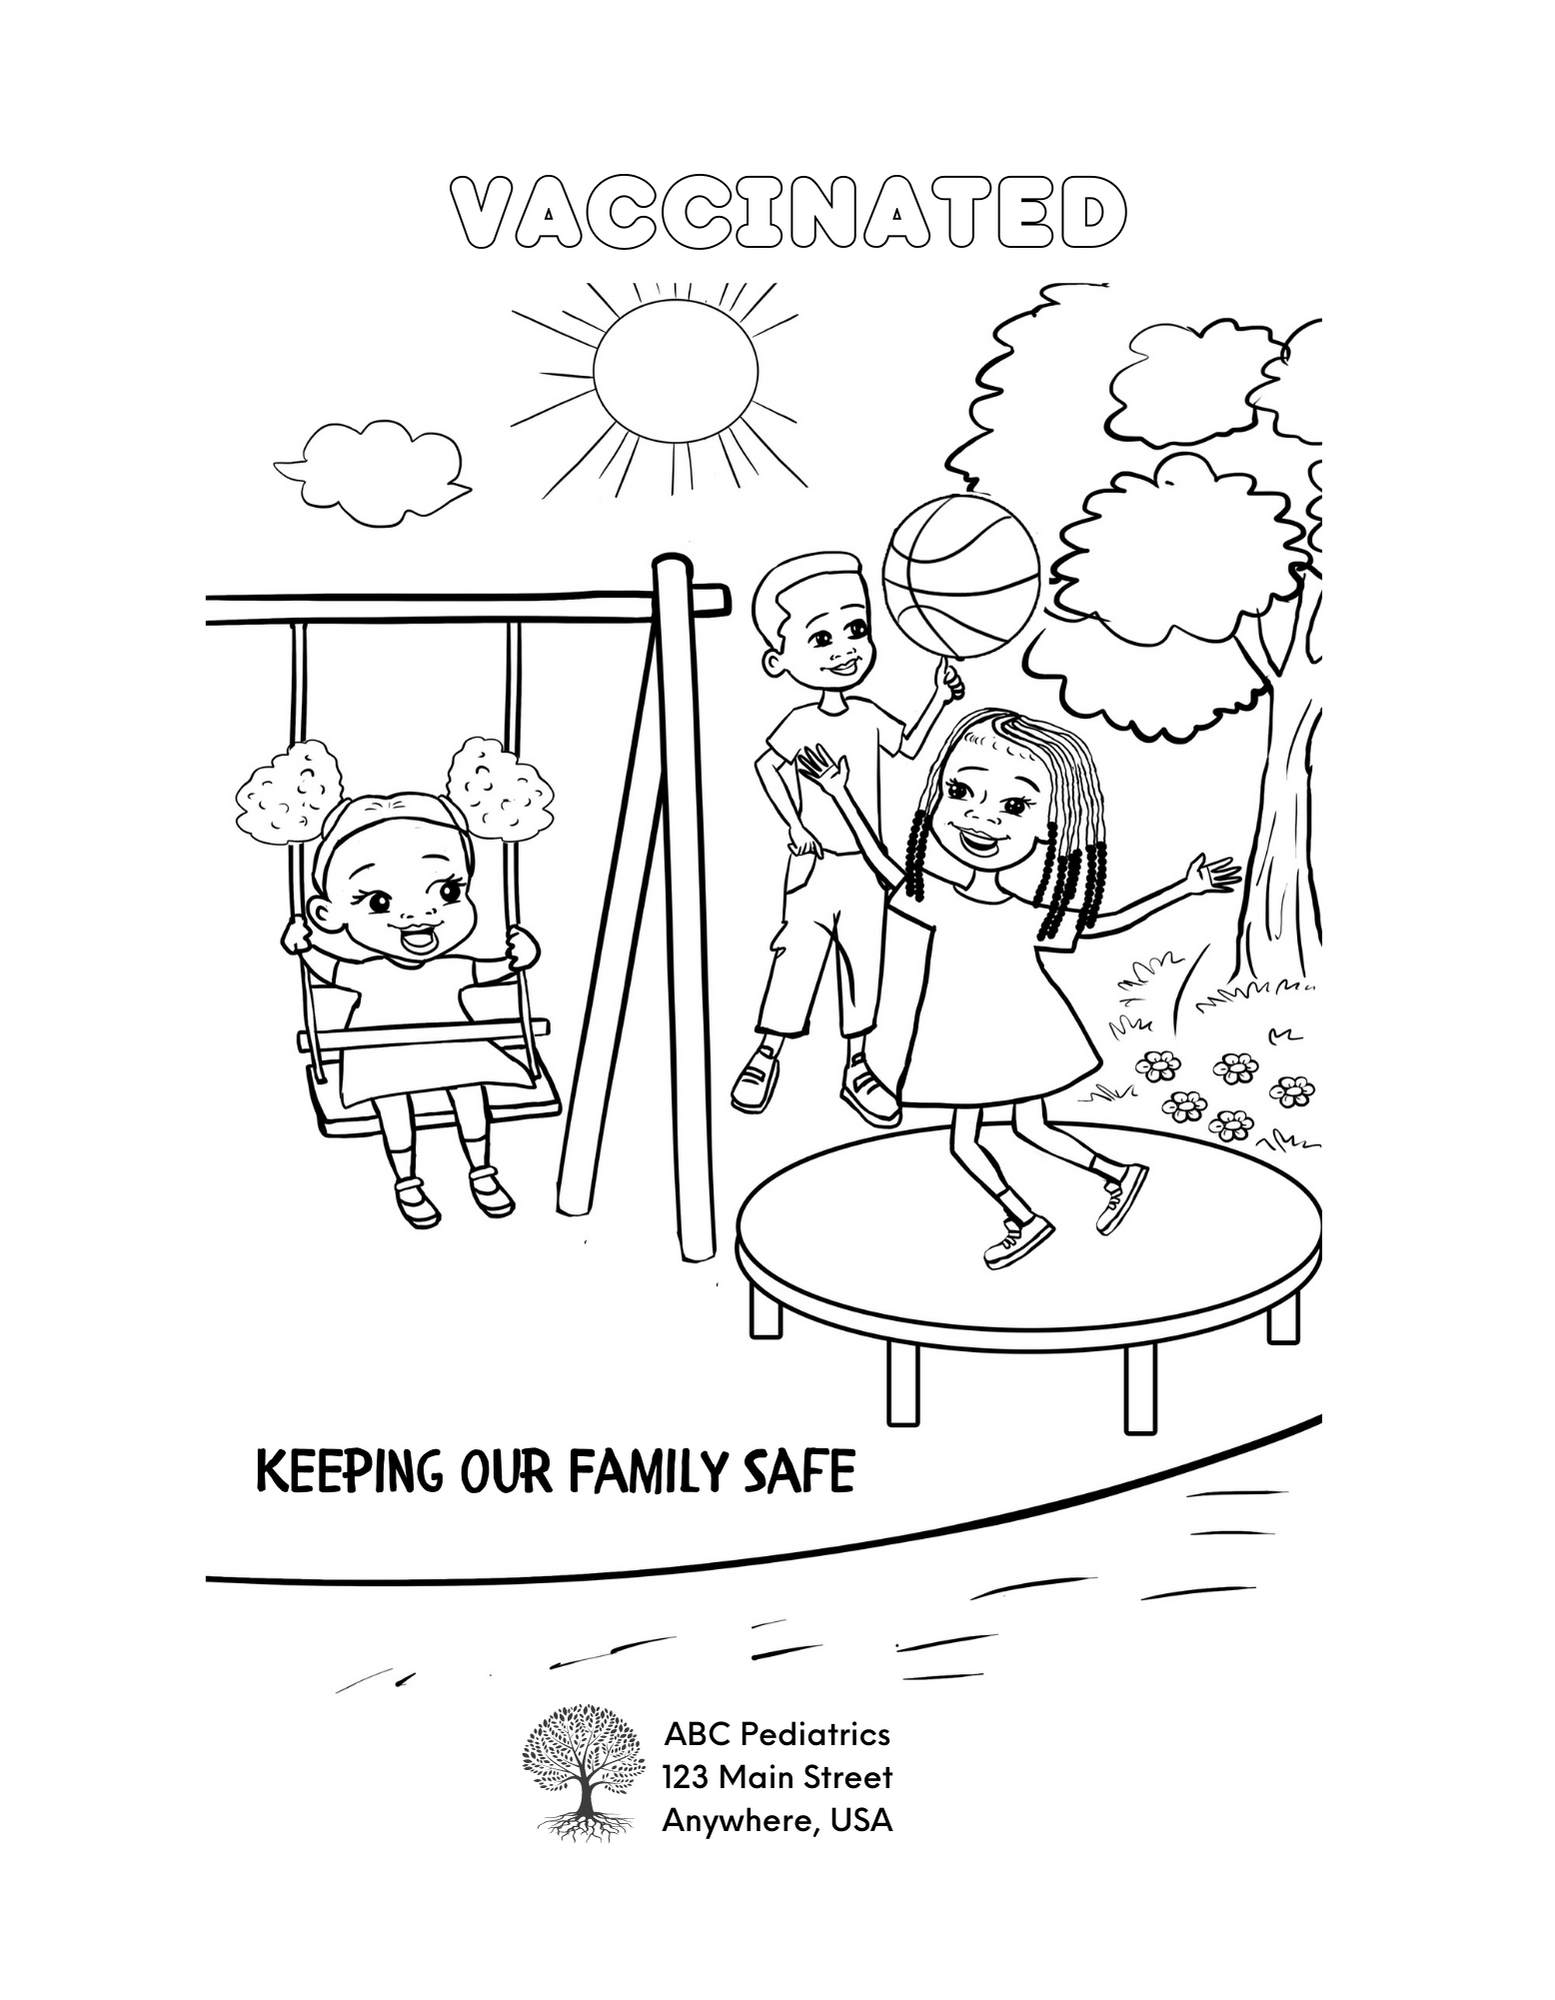 Vaccinated African American Children at Playground Coloring Sheet